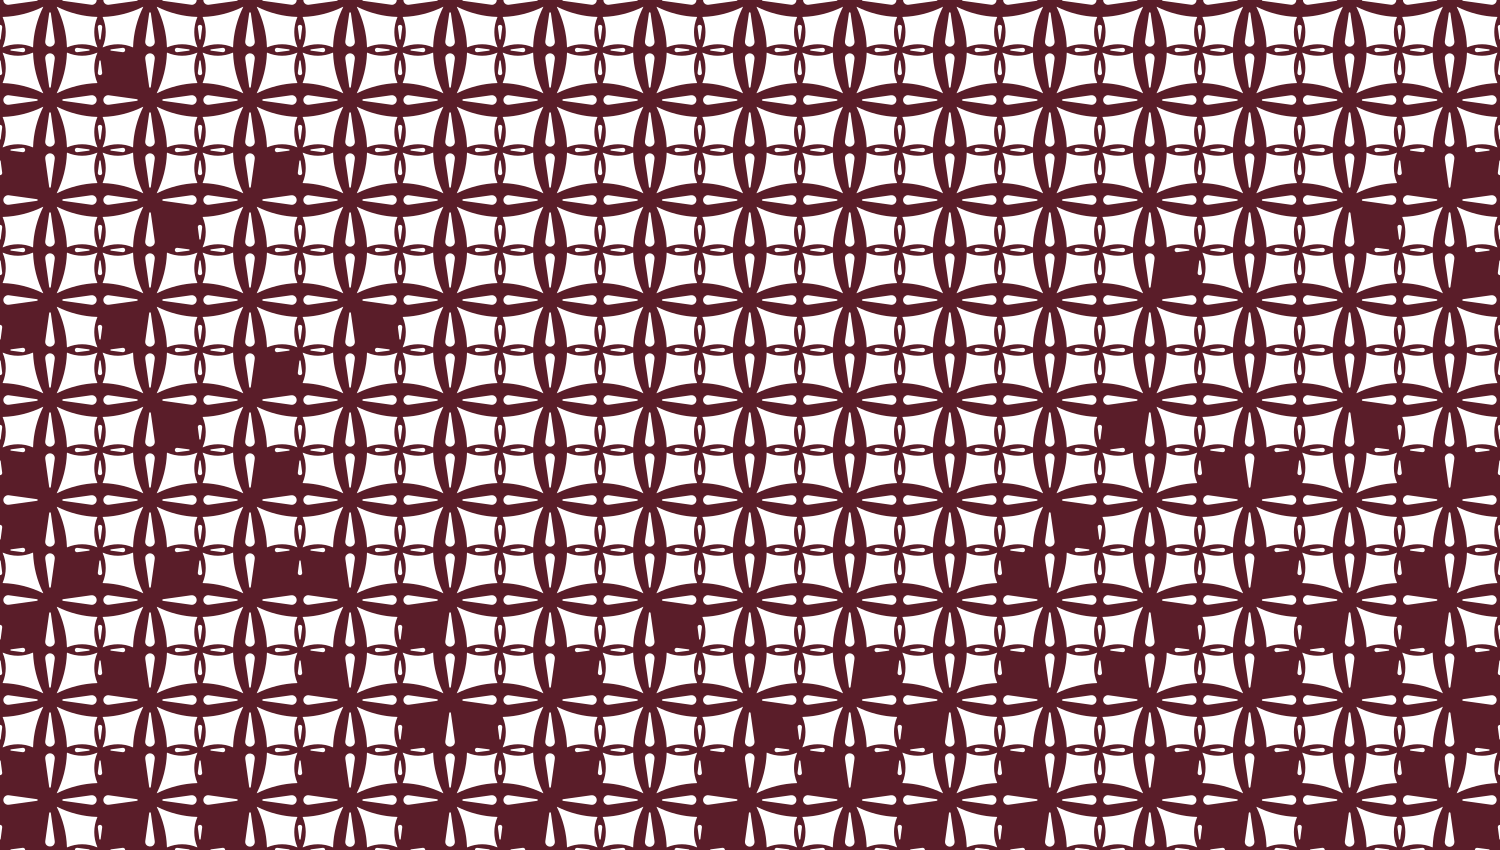 Parasoleil™ Herrington© pattern displayed with a burgundy color overlay